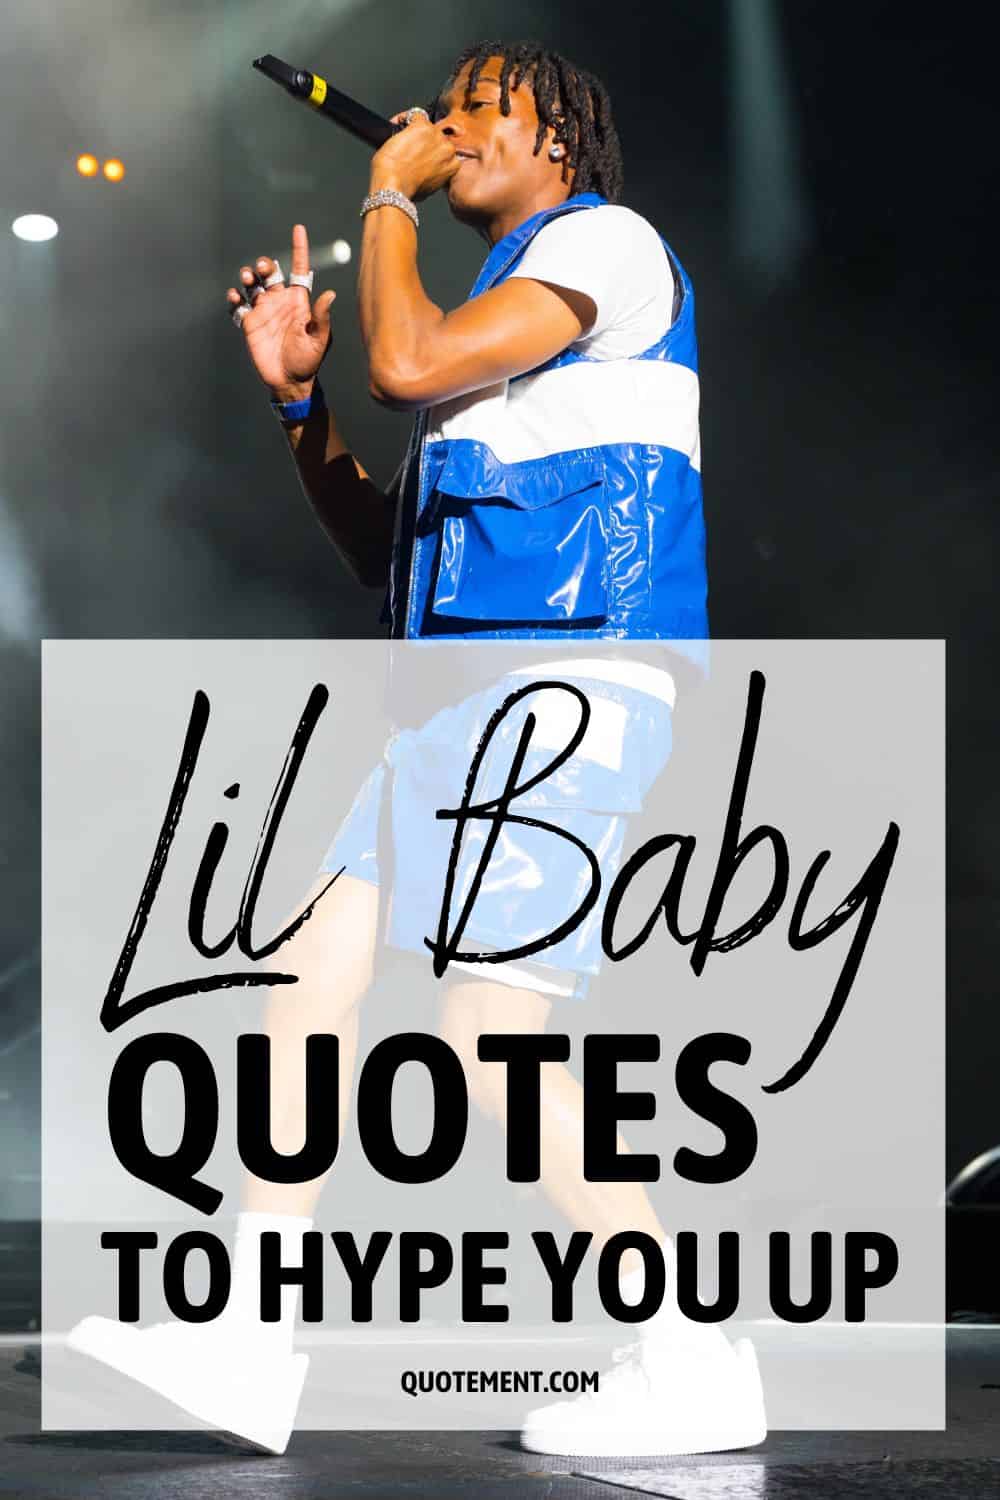 130 Lil Baby Quotes To Hype You Up
